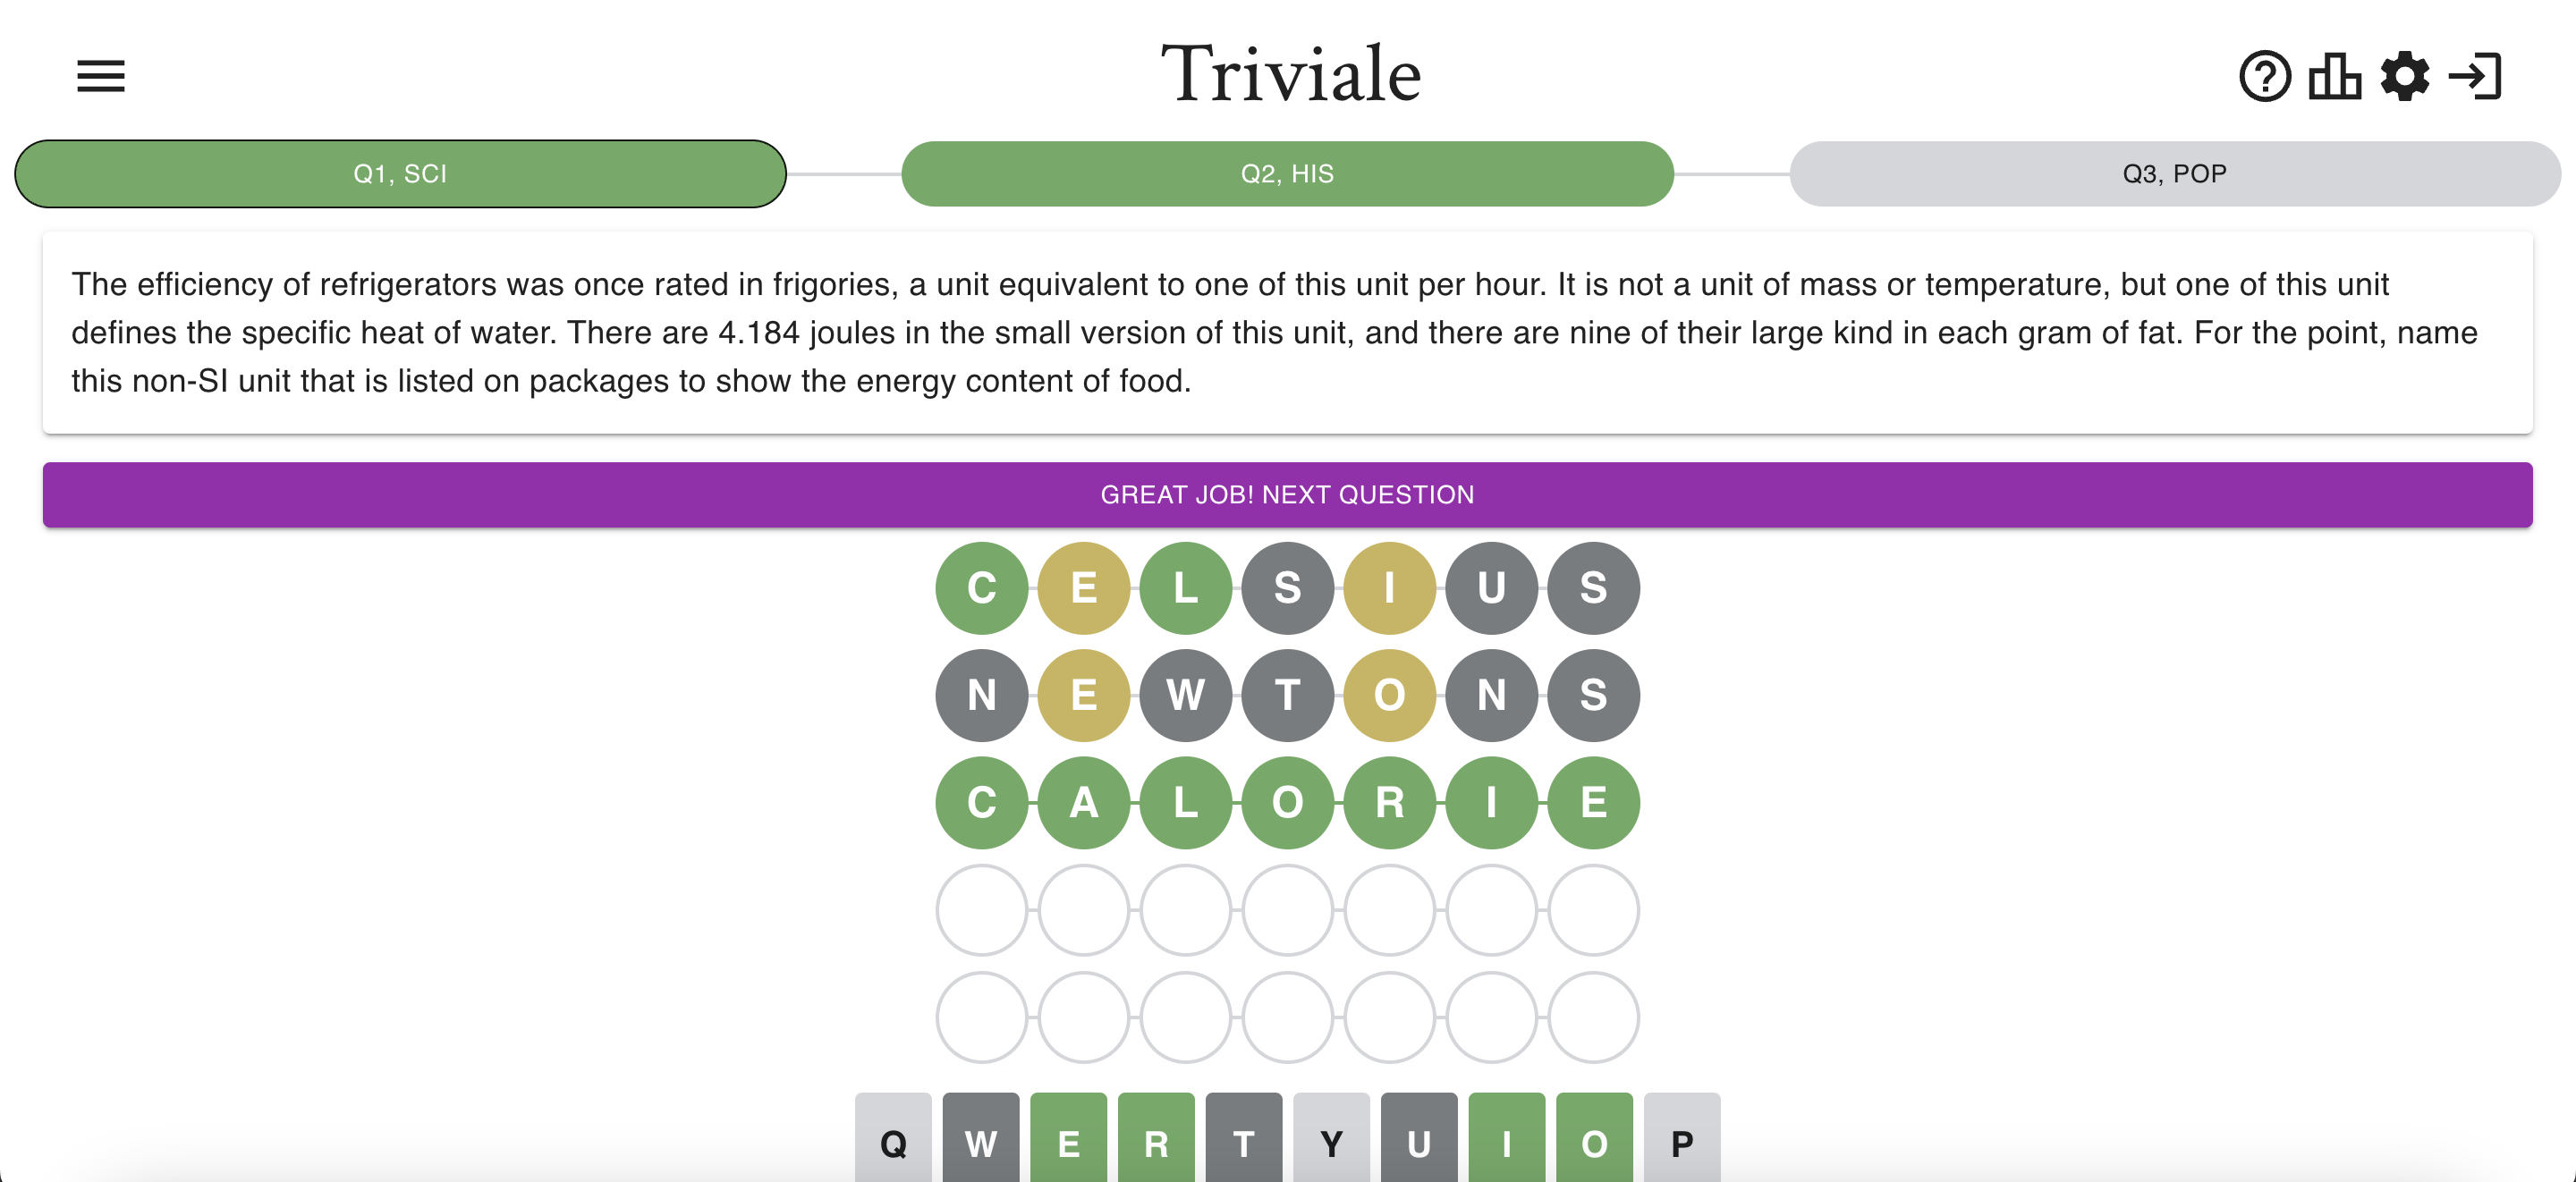 Triviale image